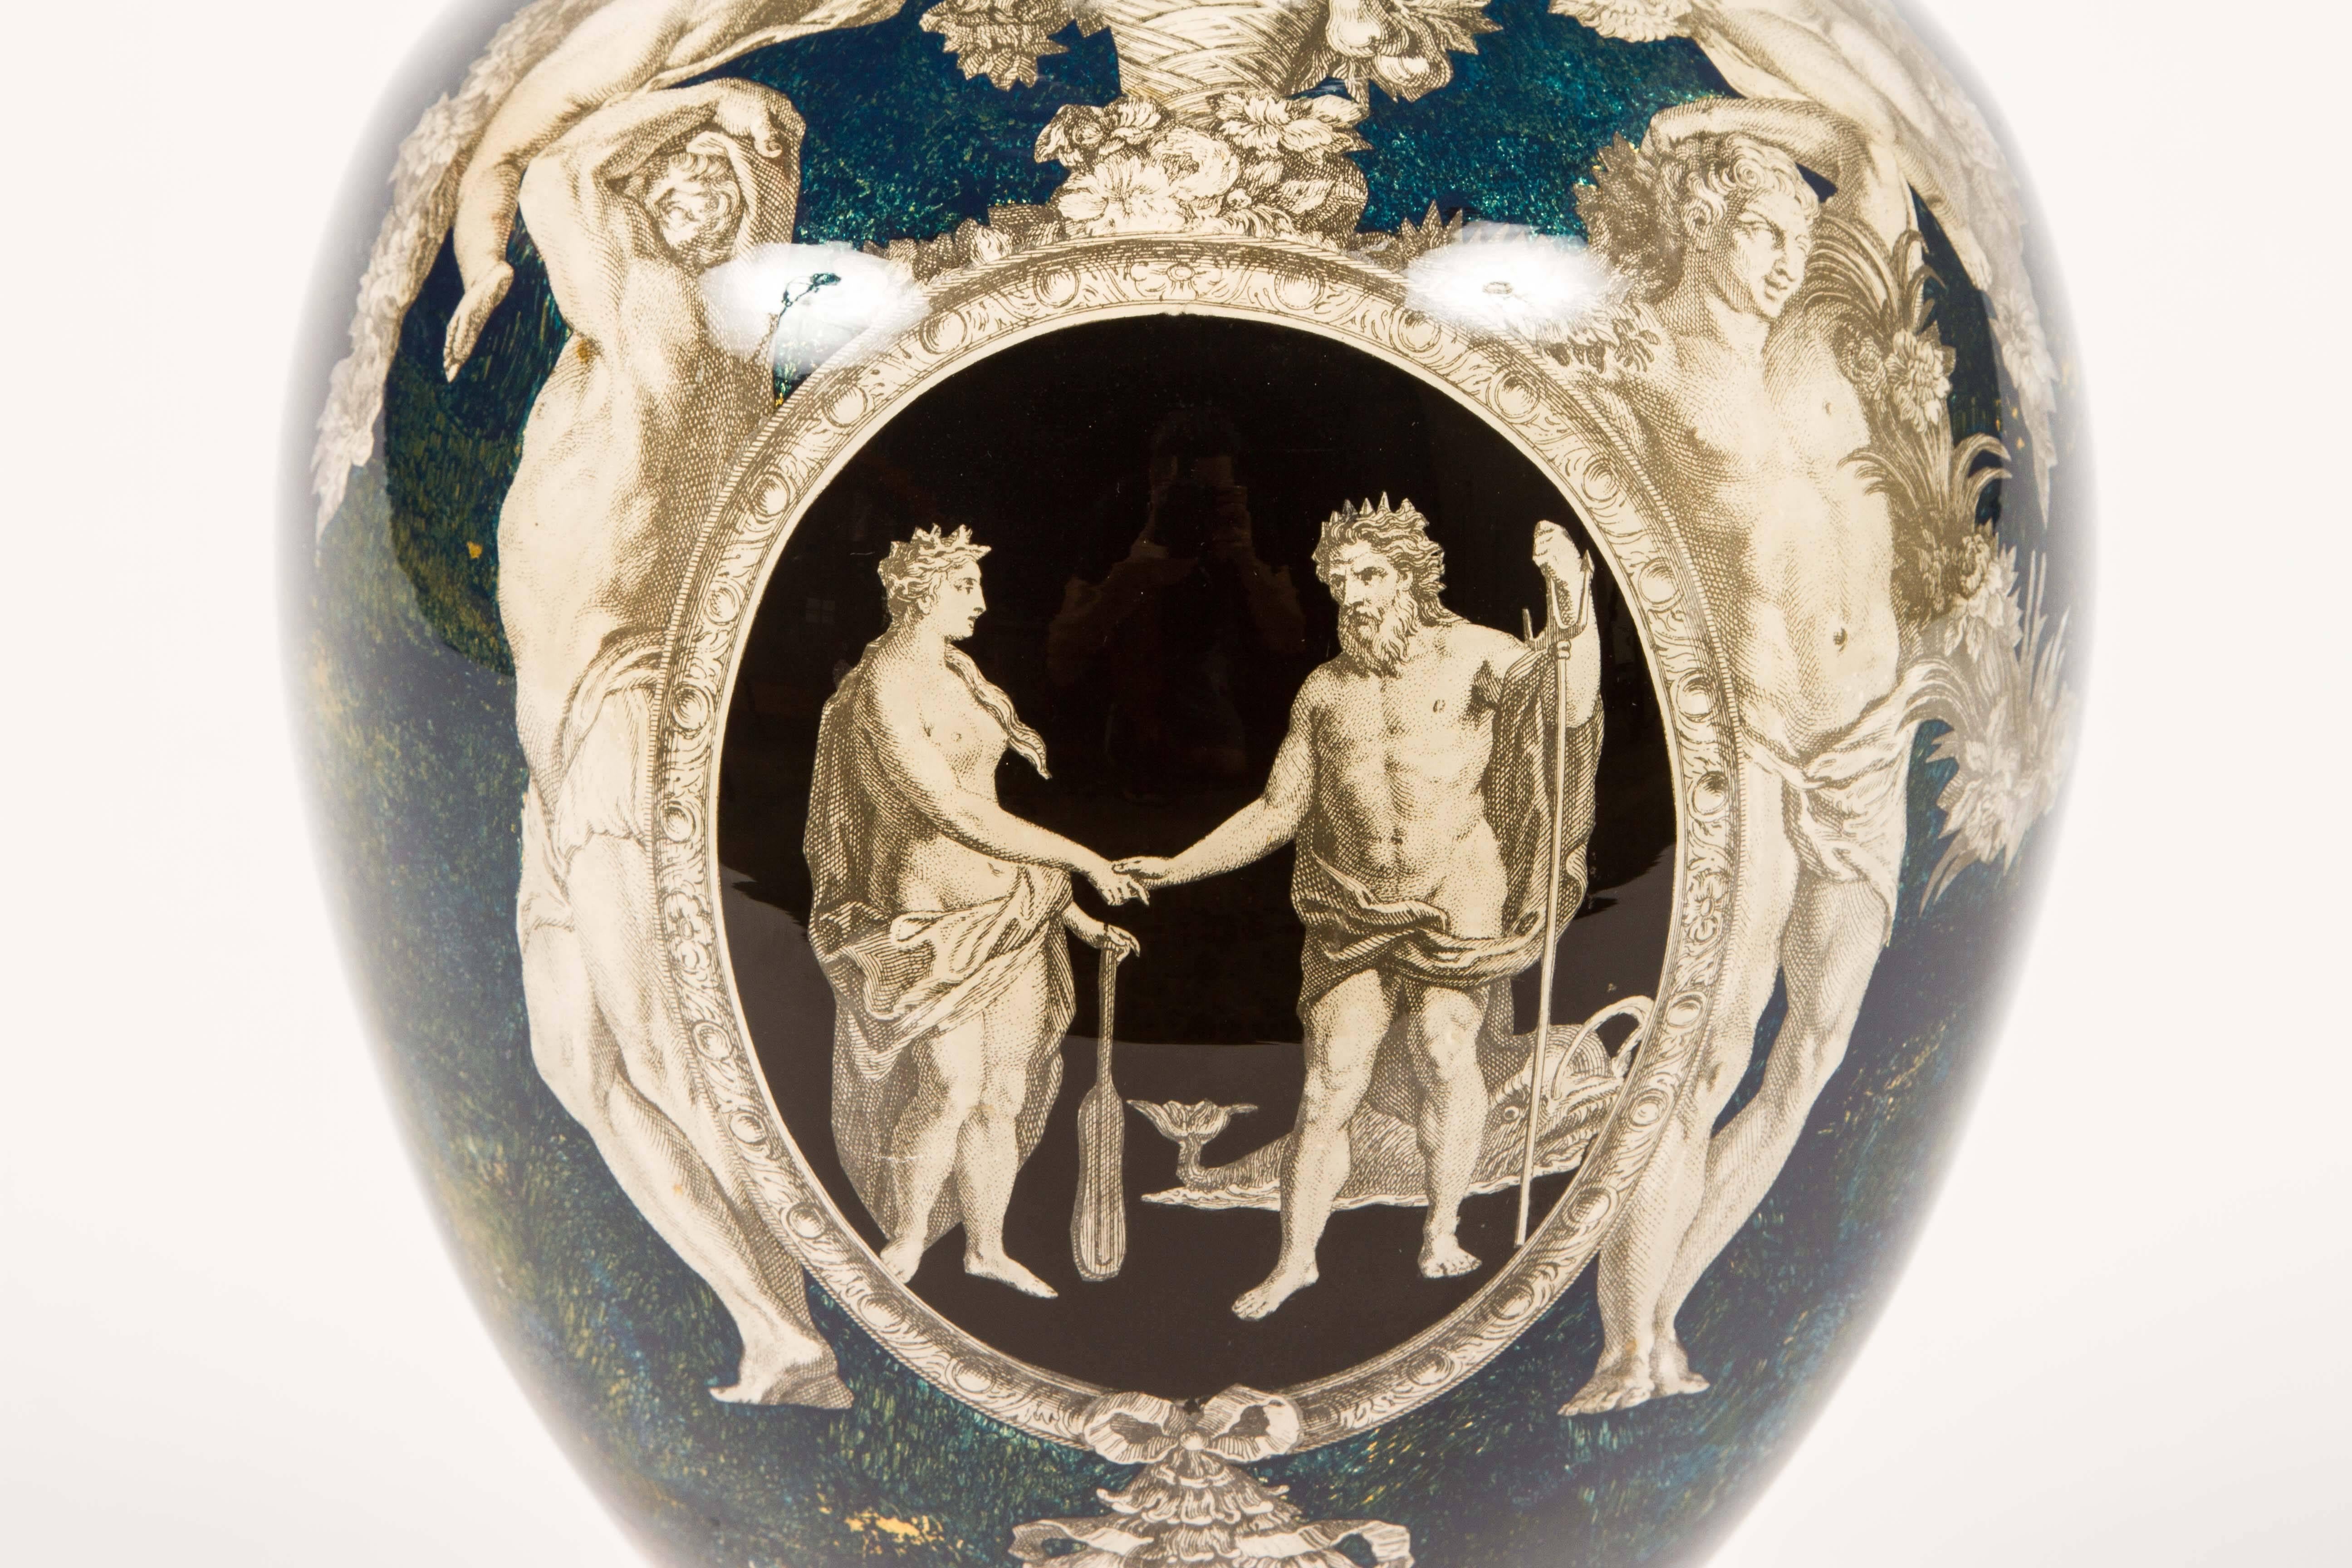 Decoupage glass lamp in the neoclassical style, of urn form, decorated with a central oval medallion depicting Neptune and Venus. No shade. Cord has been cut. Perfect for a side table in a sitting room or atop a bedside table.